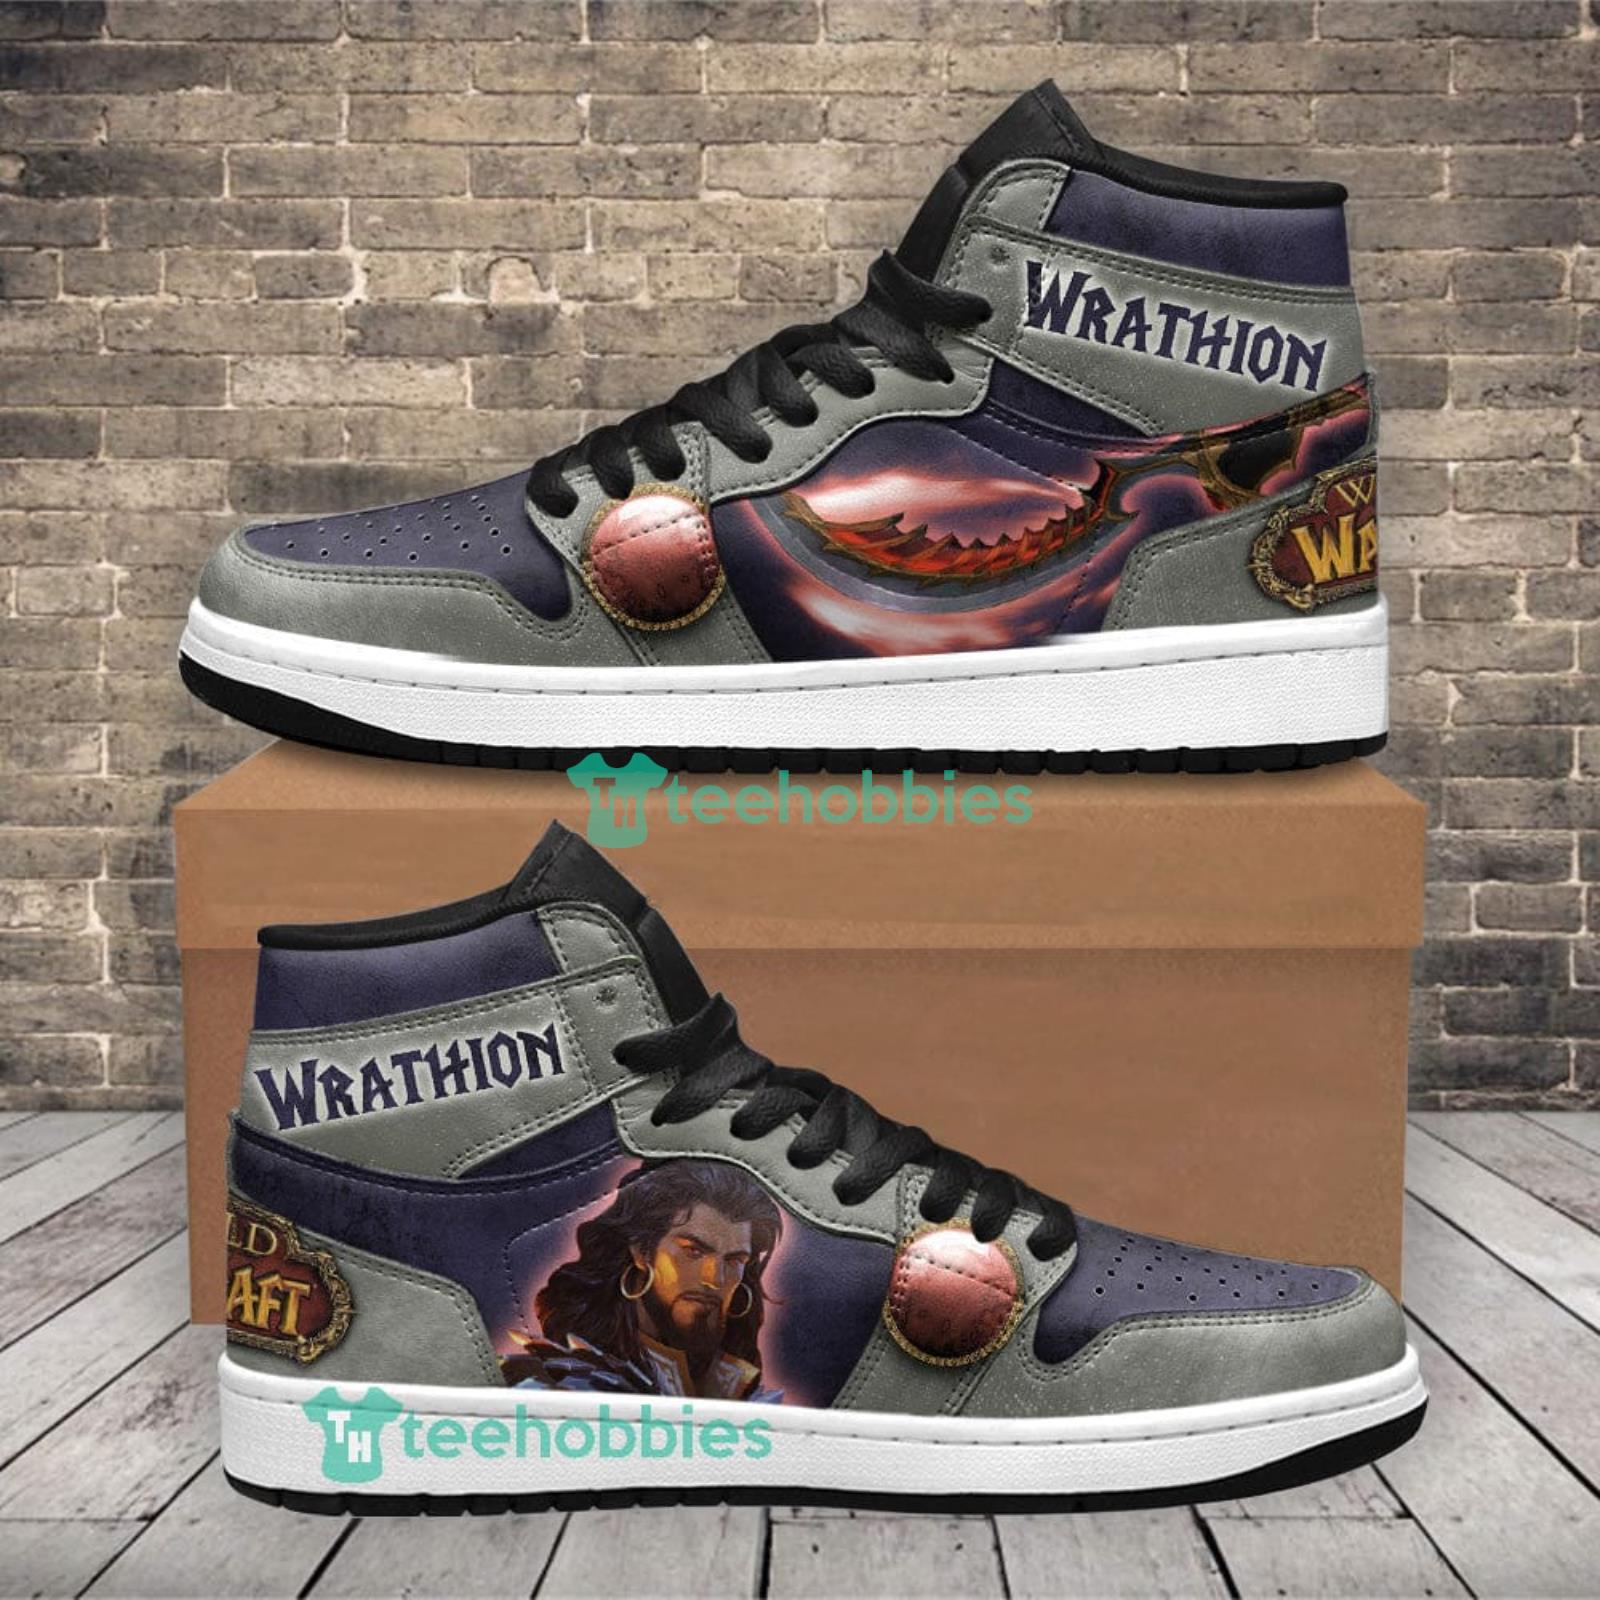 Wrathion World of Warcraft Air Jordan Hightop Shoes Sneakers For Men And Women Product Photo 1